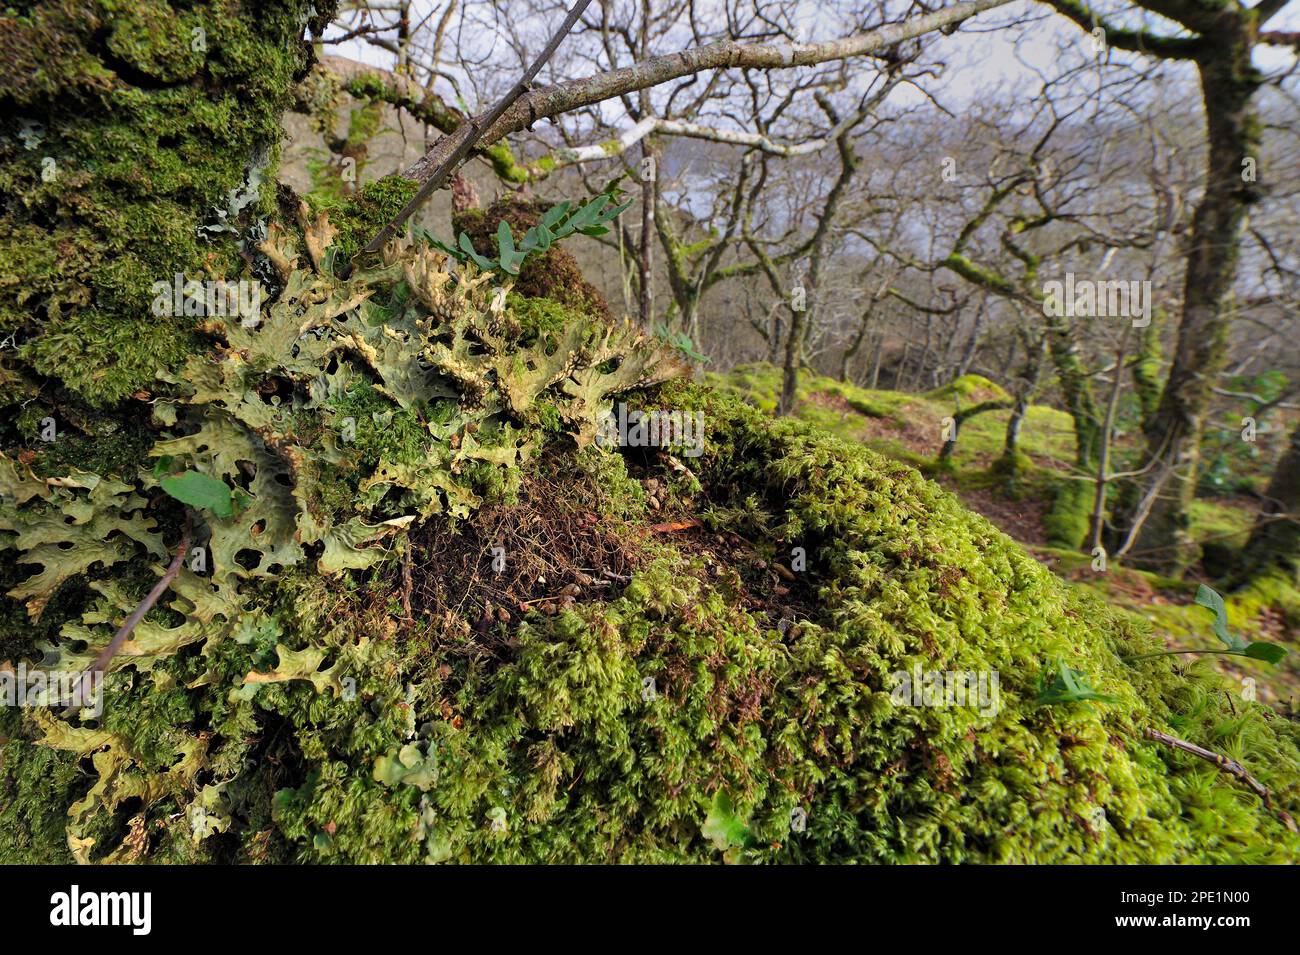 Deciduous Sessile Oakwood (Quercus petraea) rich in mosses, ferns including tree lungwort lichen in foreground (Lobaria pulmonaria), Genborrodale Stock Photo